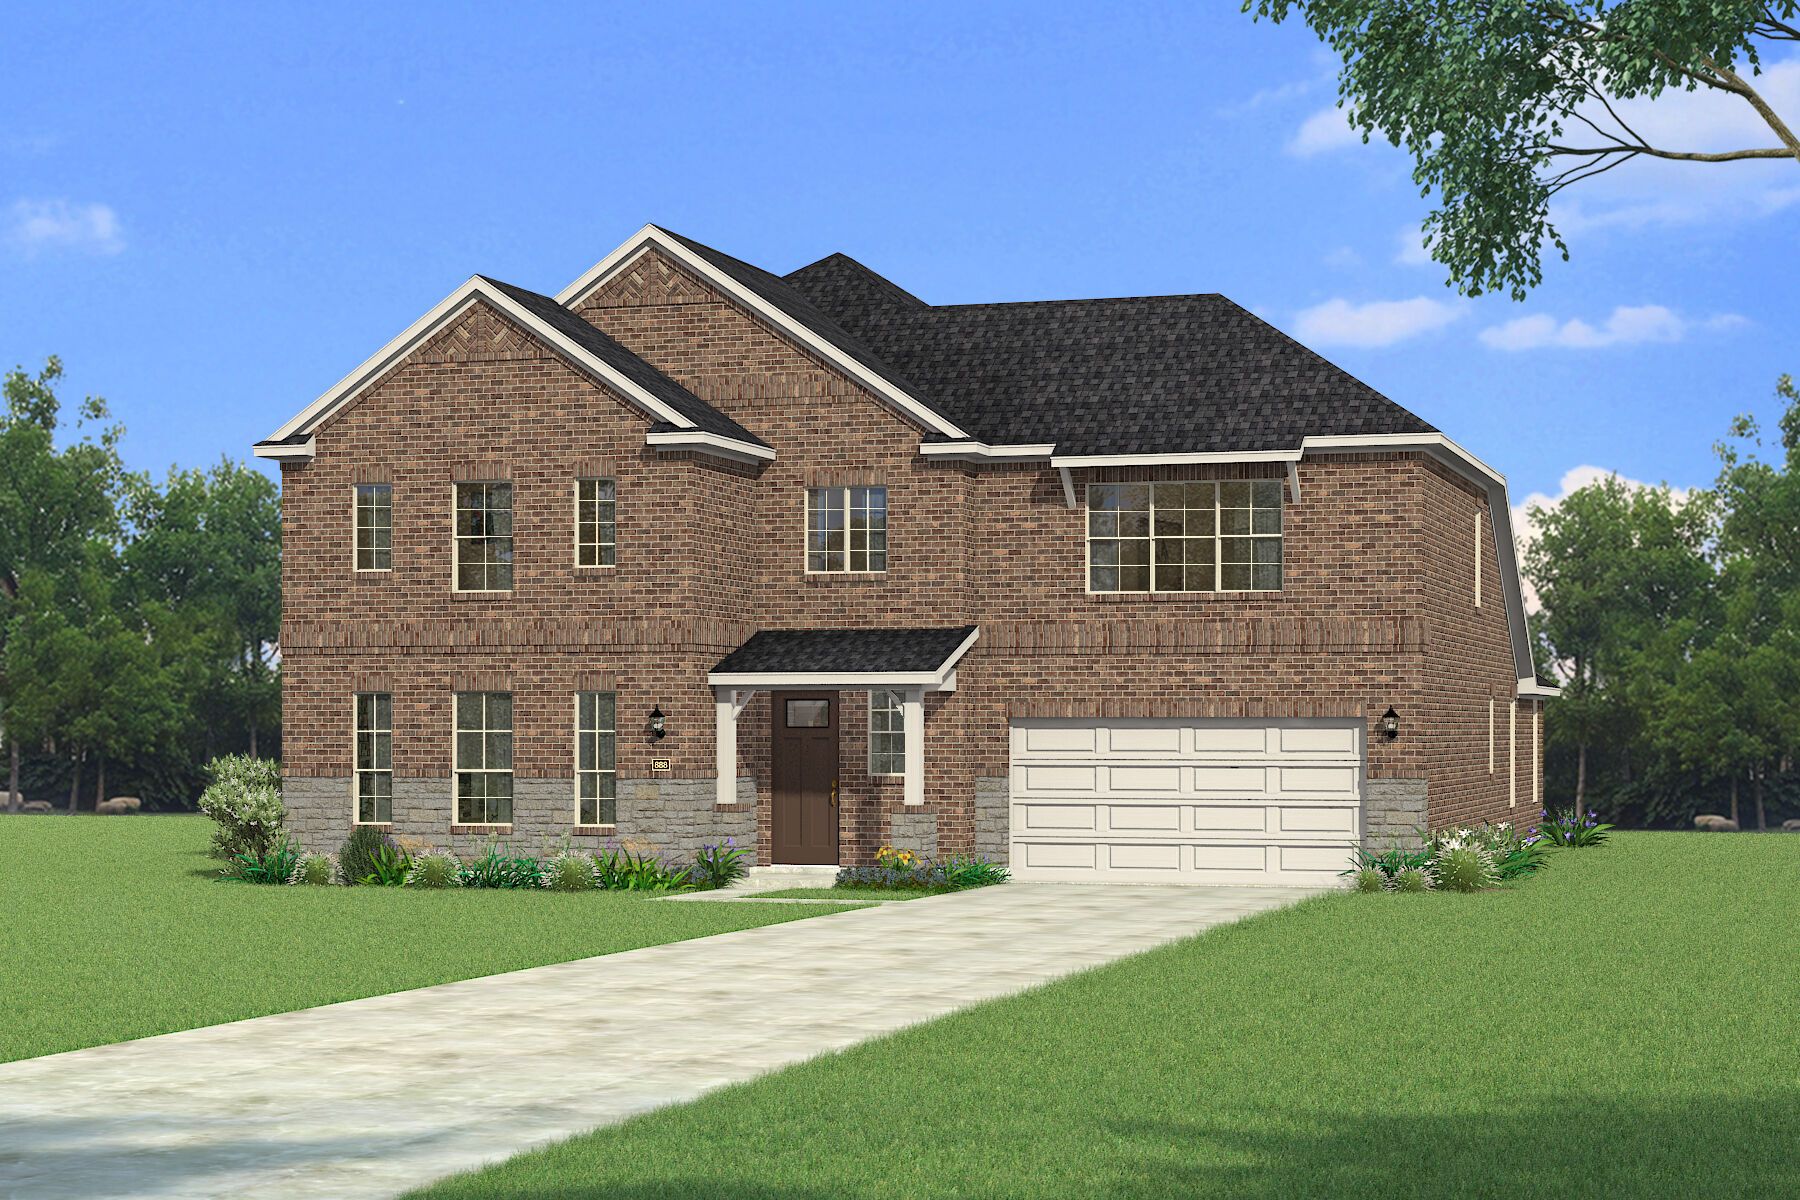 Exterior:The Siena - Hill Country Elevation